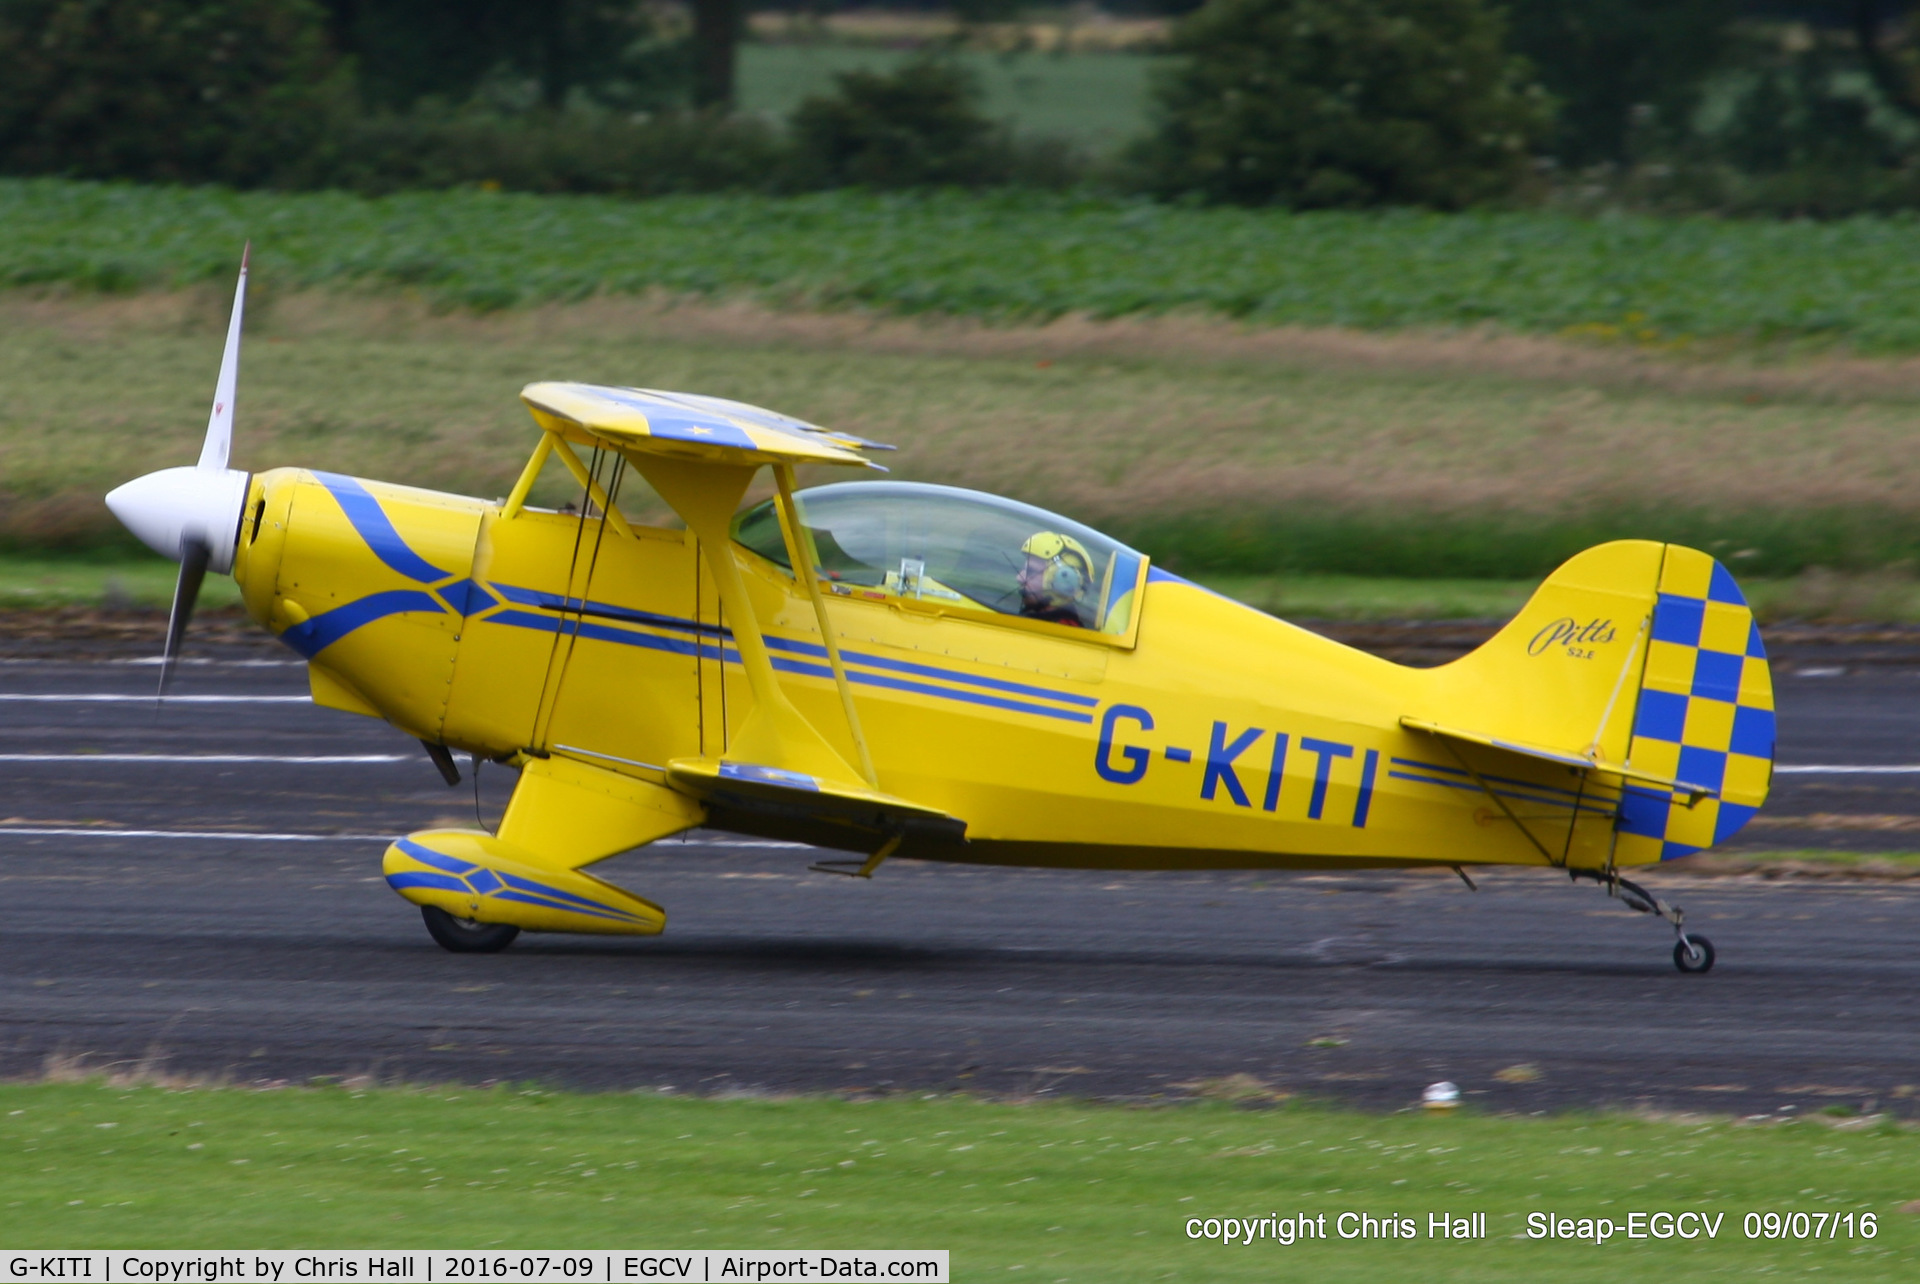 G-KITI, 1982 Pitts S-2E Special C/N 002, at Sleap